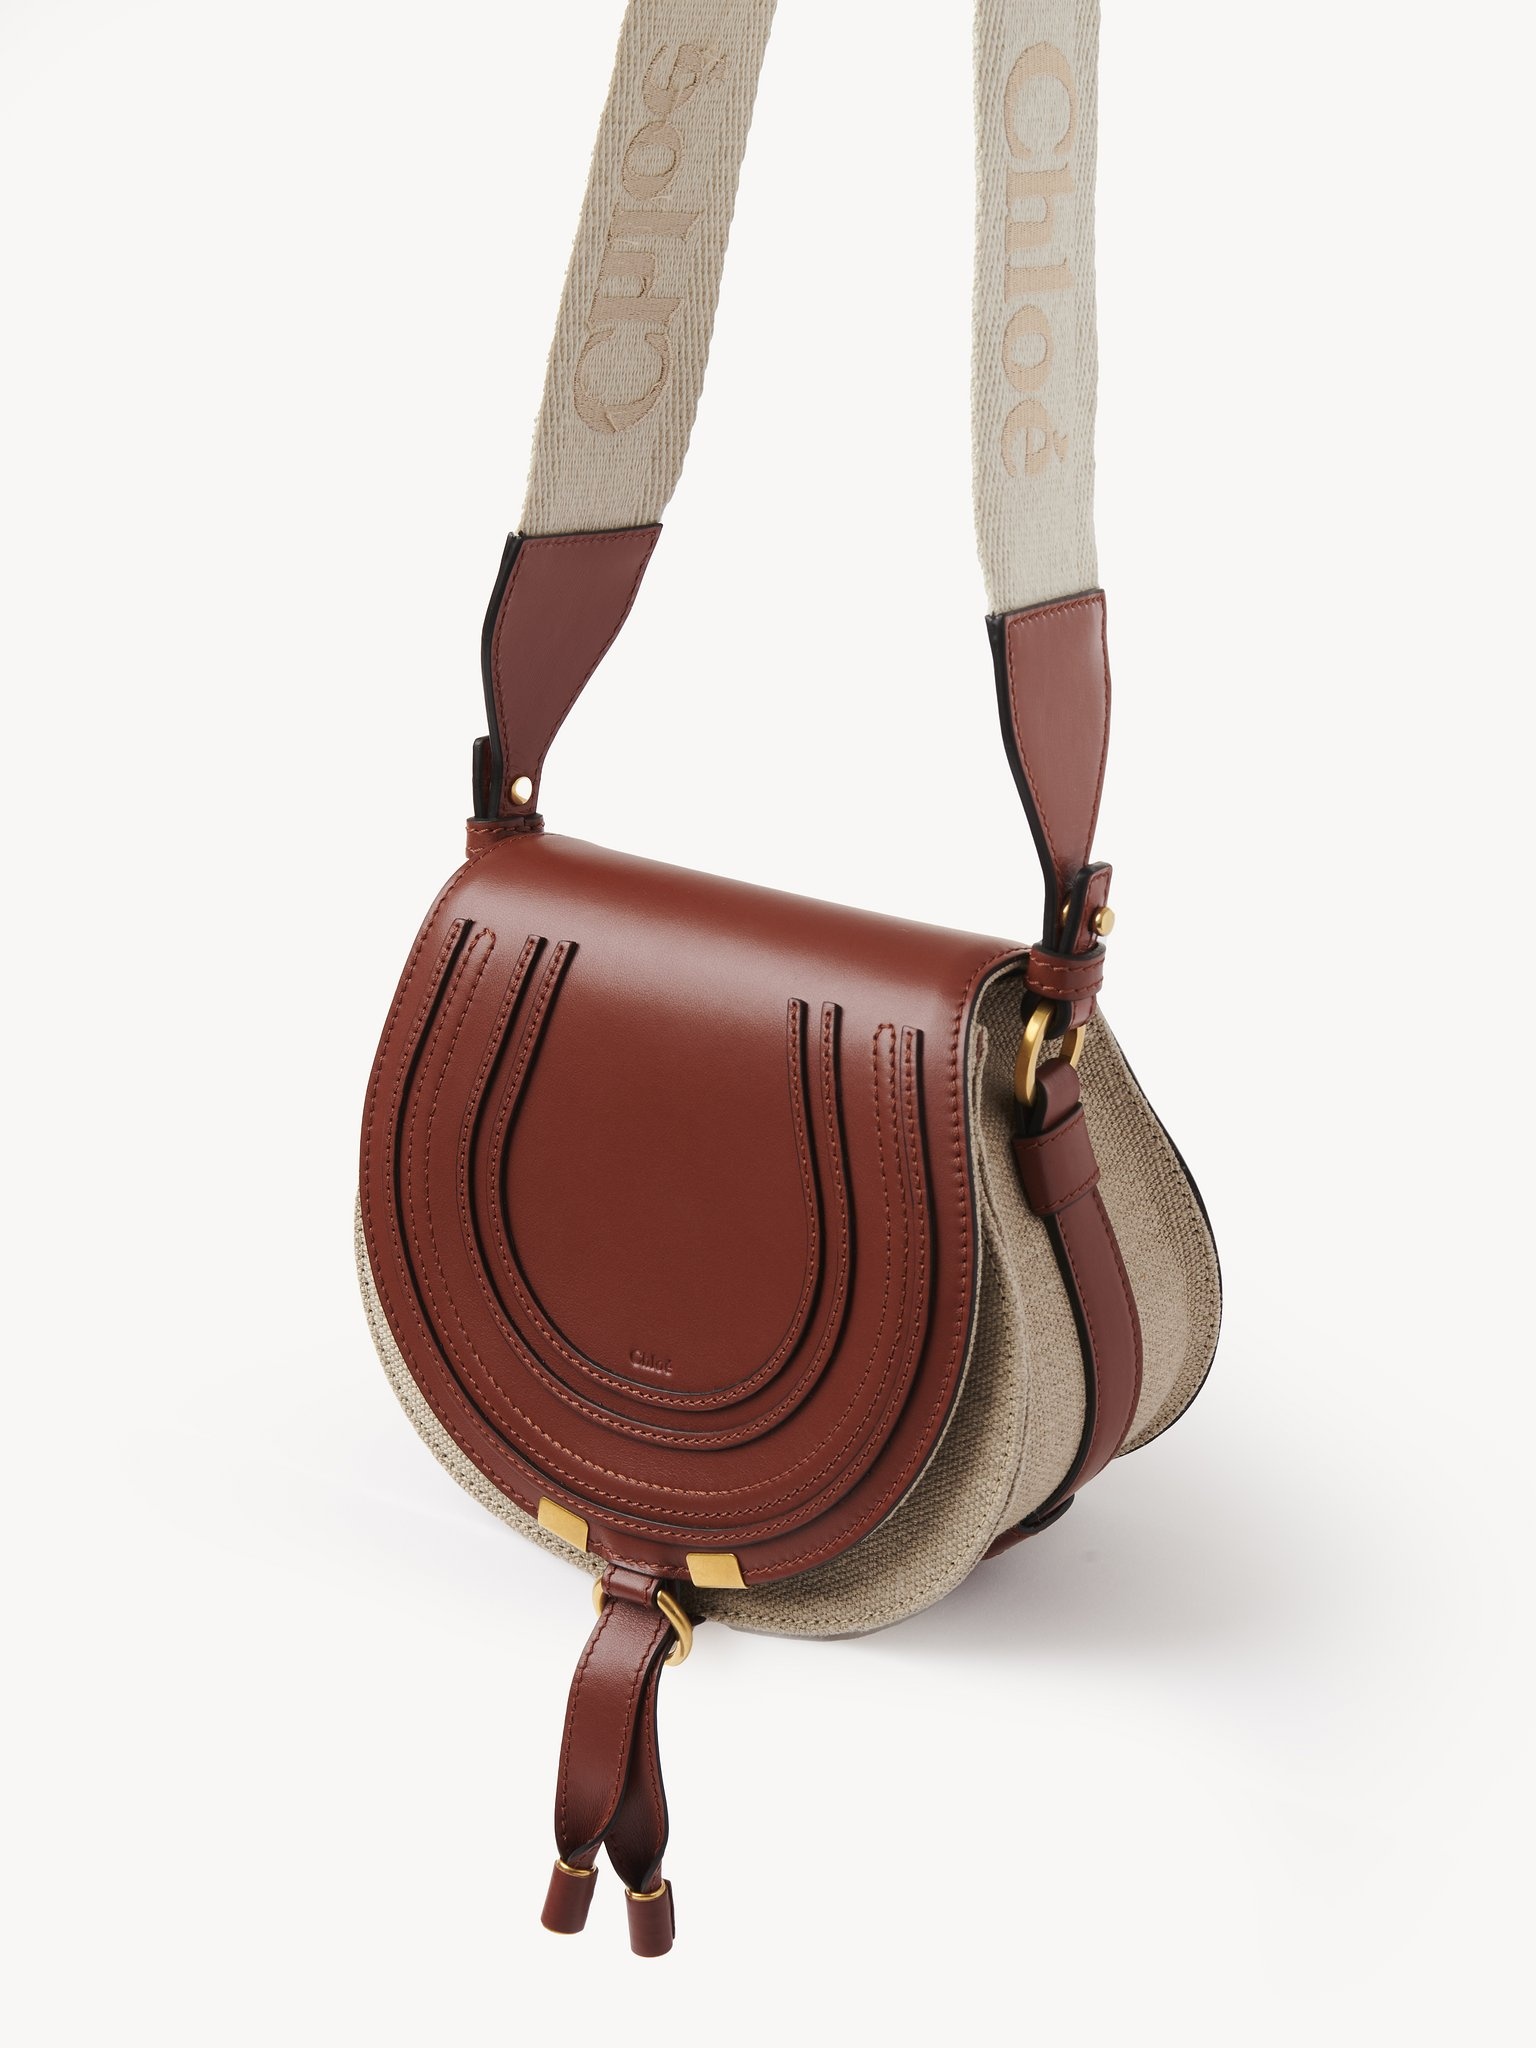 SMALL MARCIE SADDLE BAG IN LINEN & SMOOTH LEATHER - 3